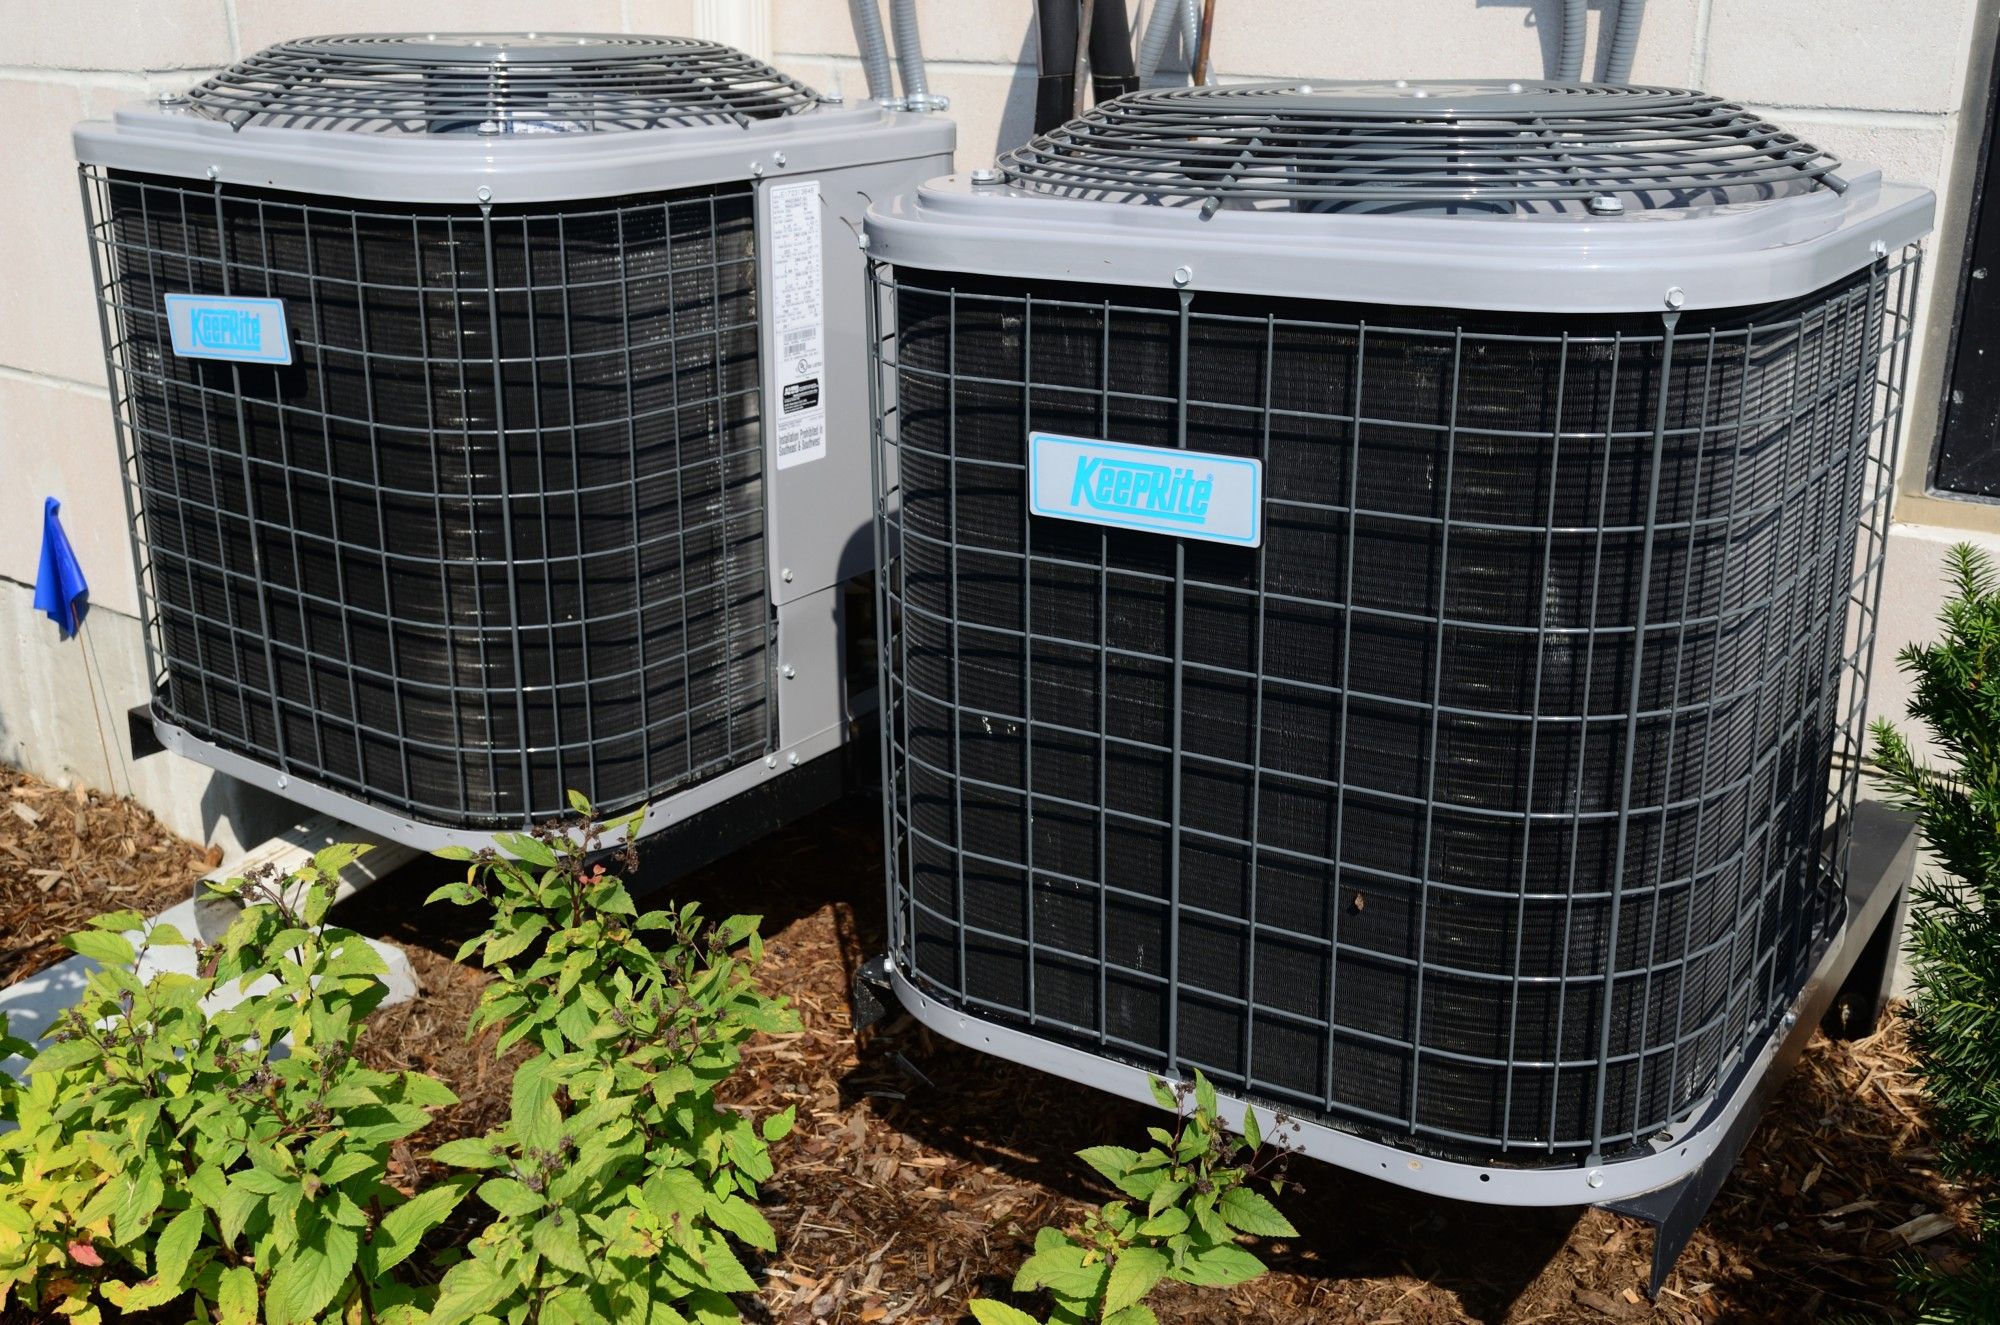 Schedule Expert Tune-Ups For Your Home’s Air Conditioning System In Biloxi, MS